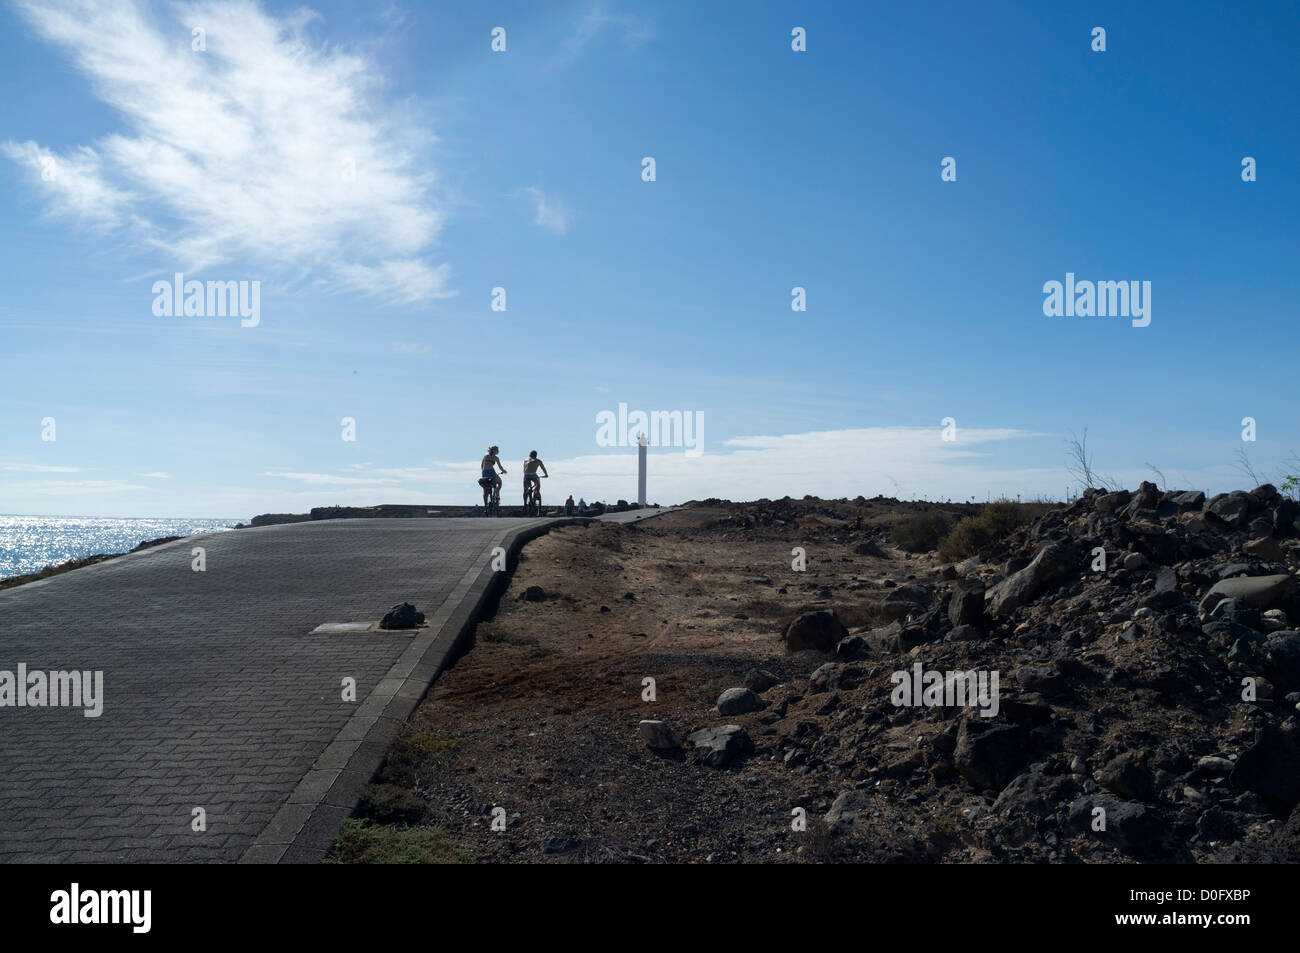 dh Faro de Pechiguera lighthouse PLAYA BLANCA LANZAROTE Tourist couple cyclists lighthouses cycling holiday young people couples riding cycles Stock Photo